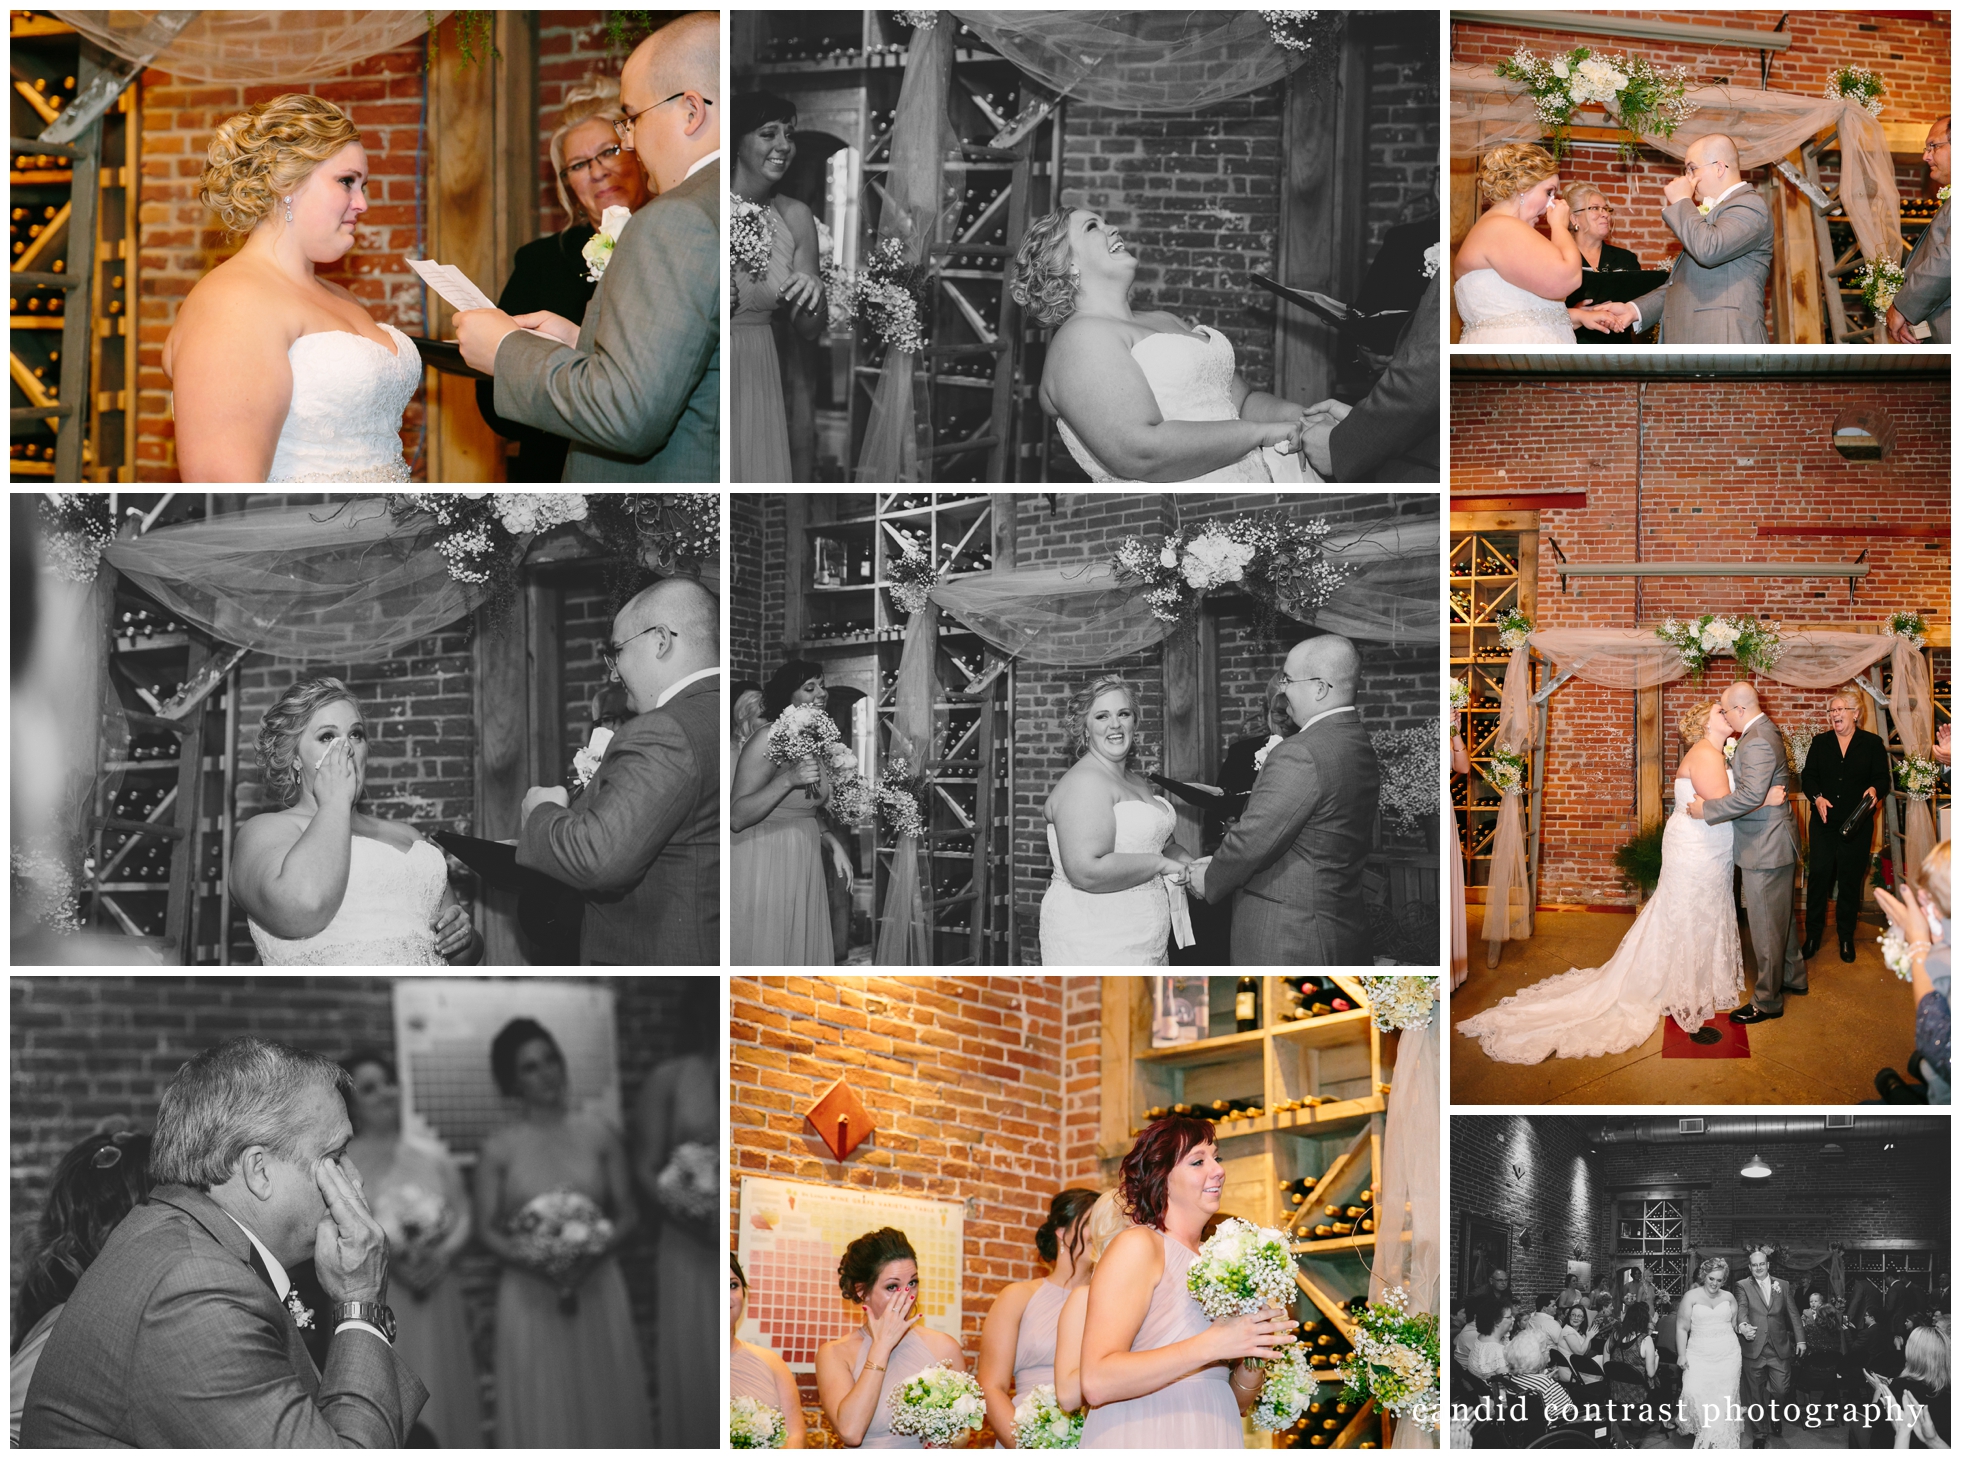 wedding ceremony for Dubuque IA winery wedding, candid contrast photography, stone cliff winery